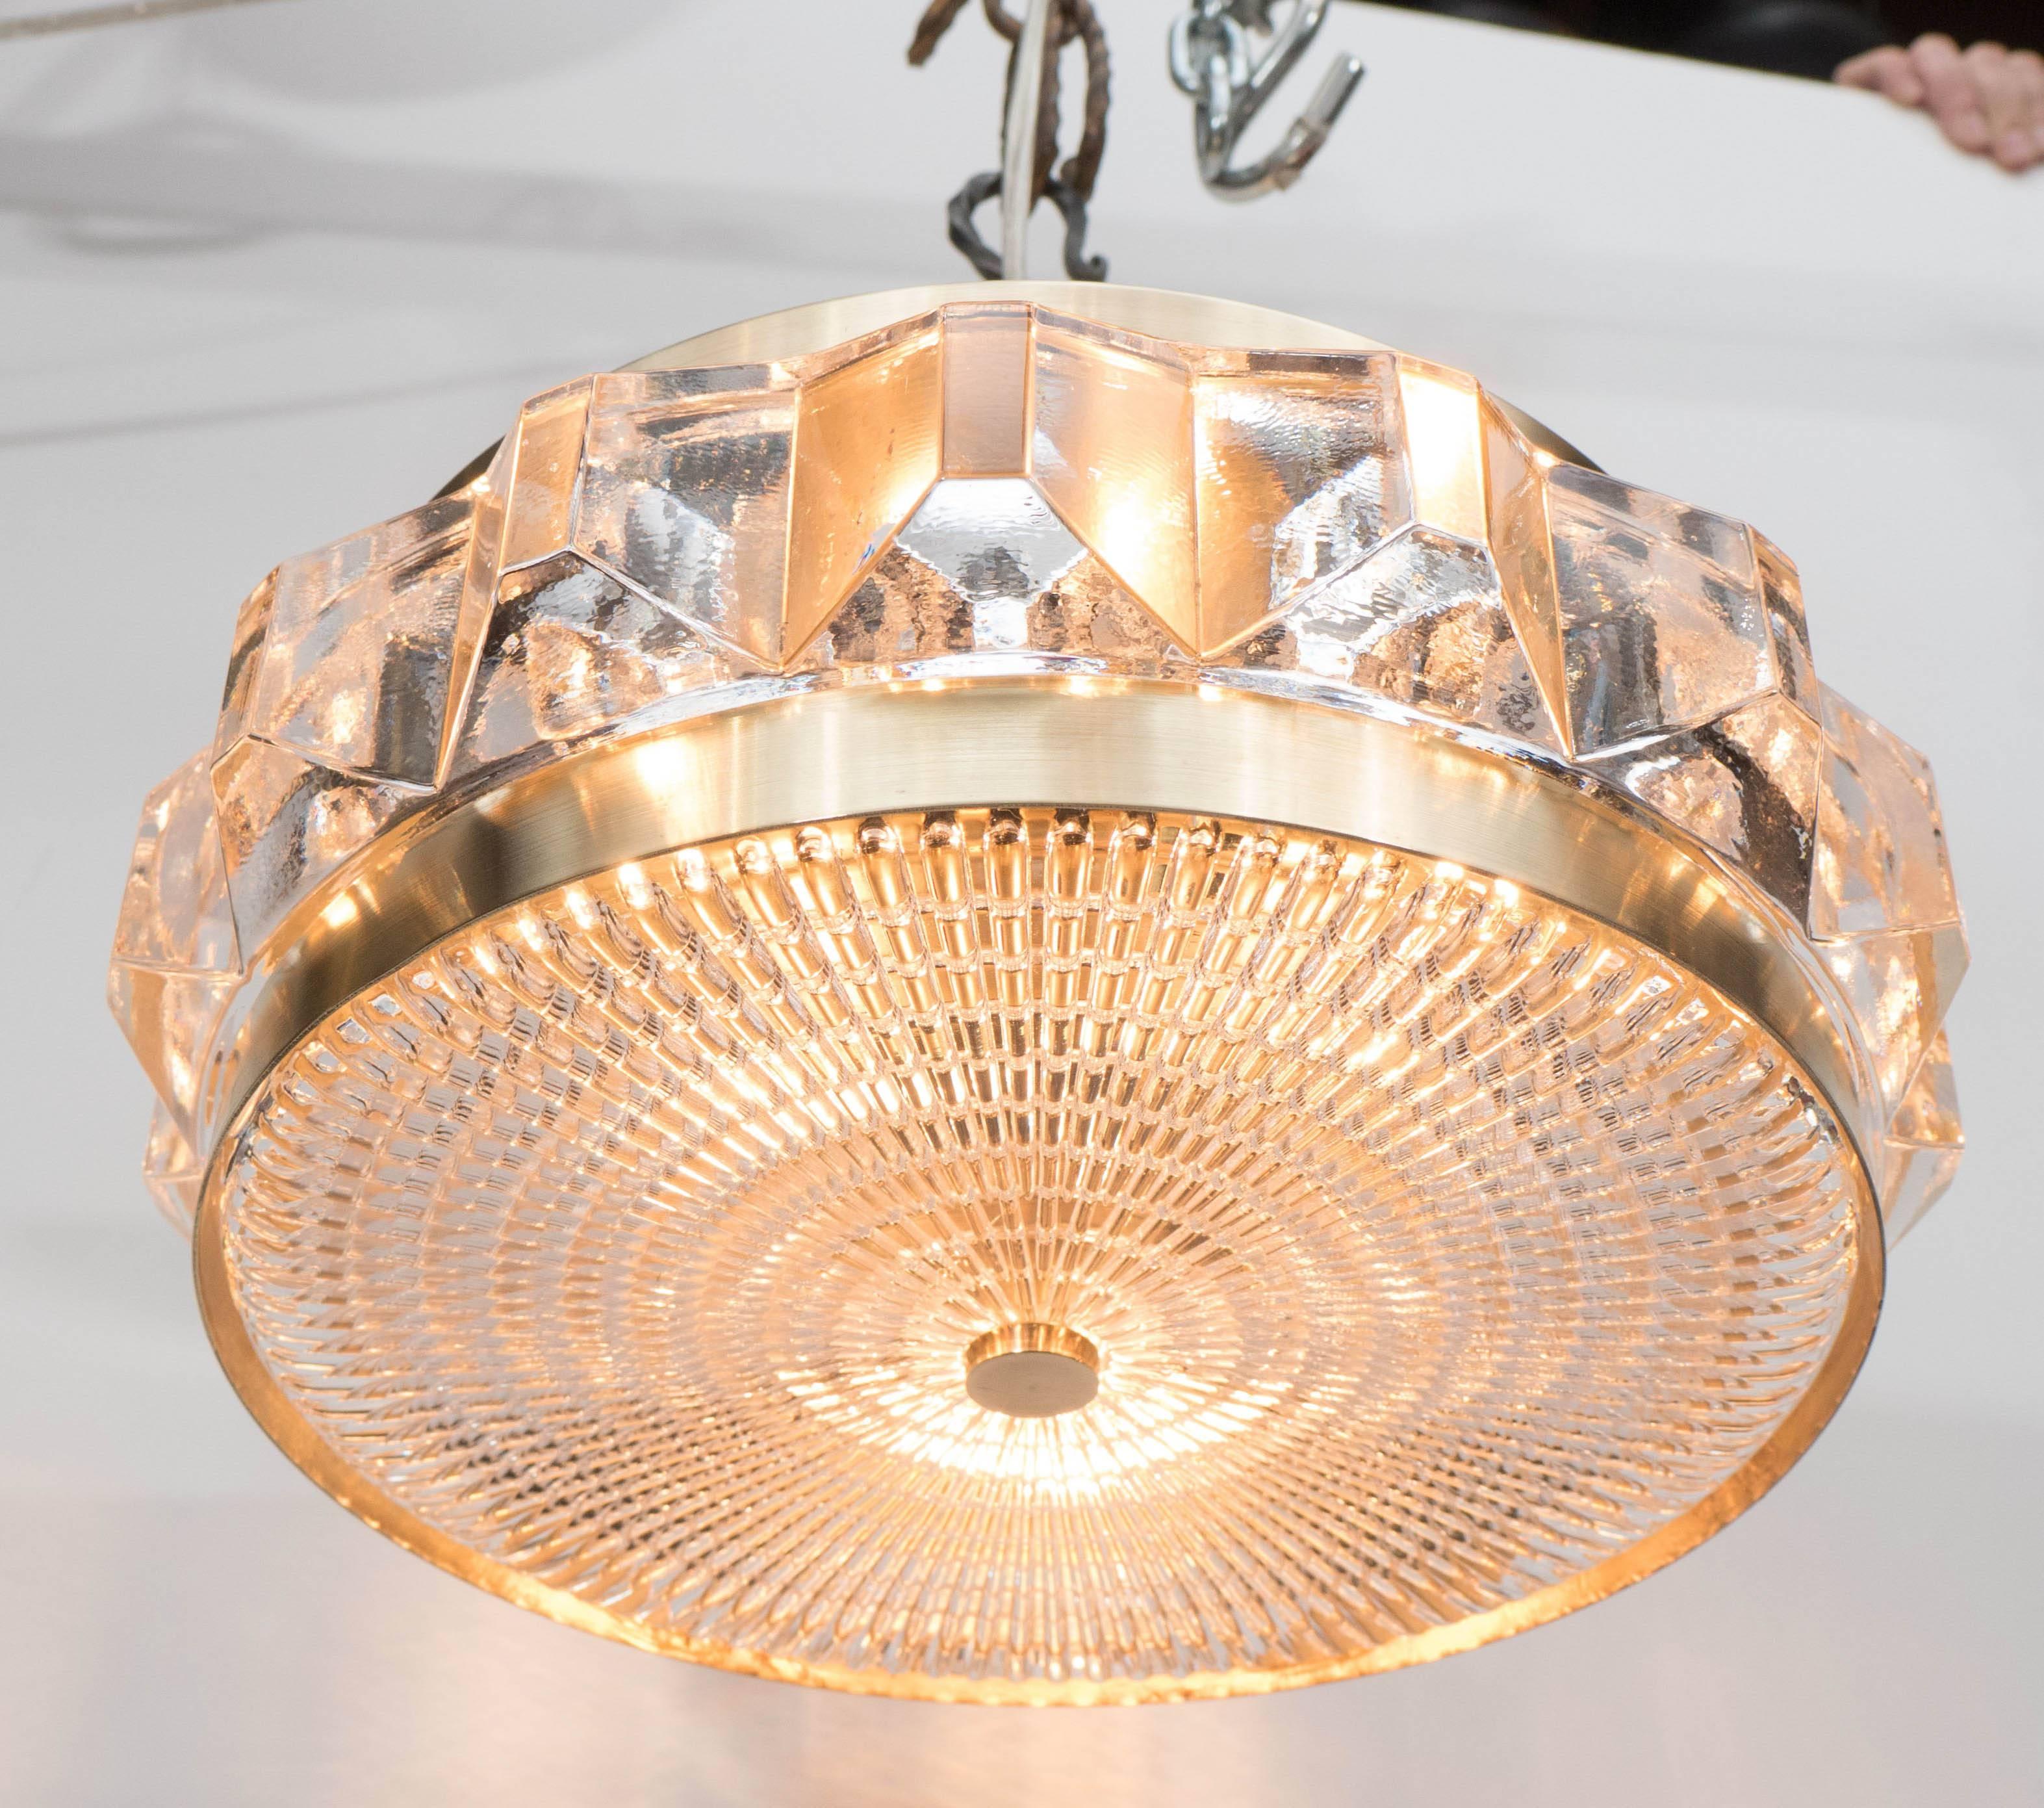 Mid-20th Century Flush Mount Chandelier with Textured Glass and Brass Fittings by Orrefors